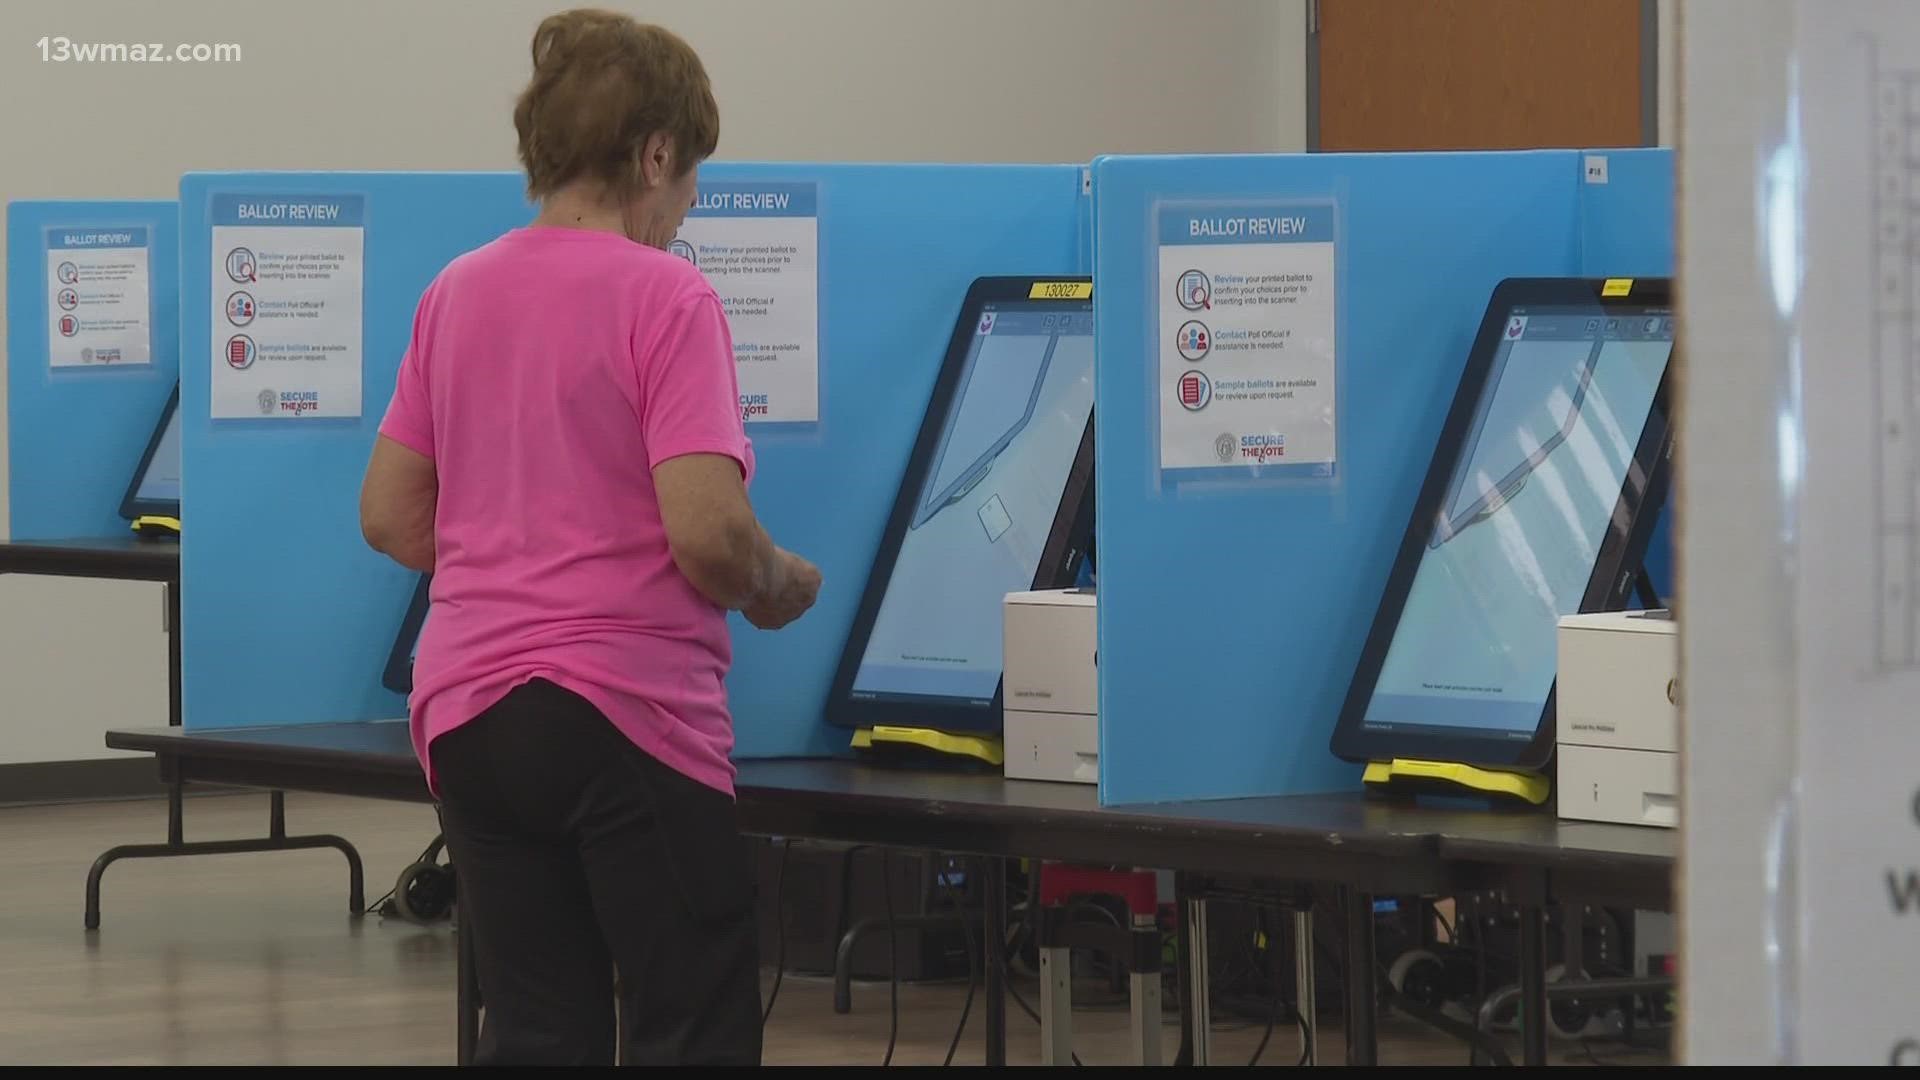 Thousands have already voted, and thousands more are expected to cast their ballots, but how is your vote counted?